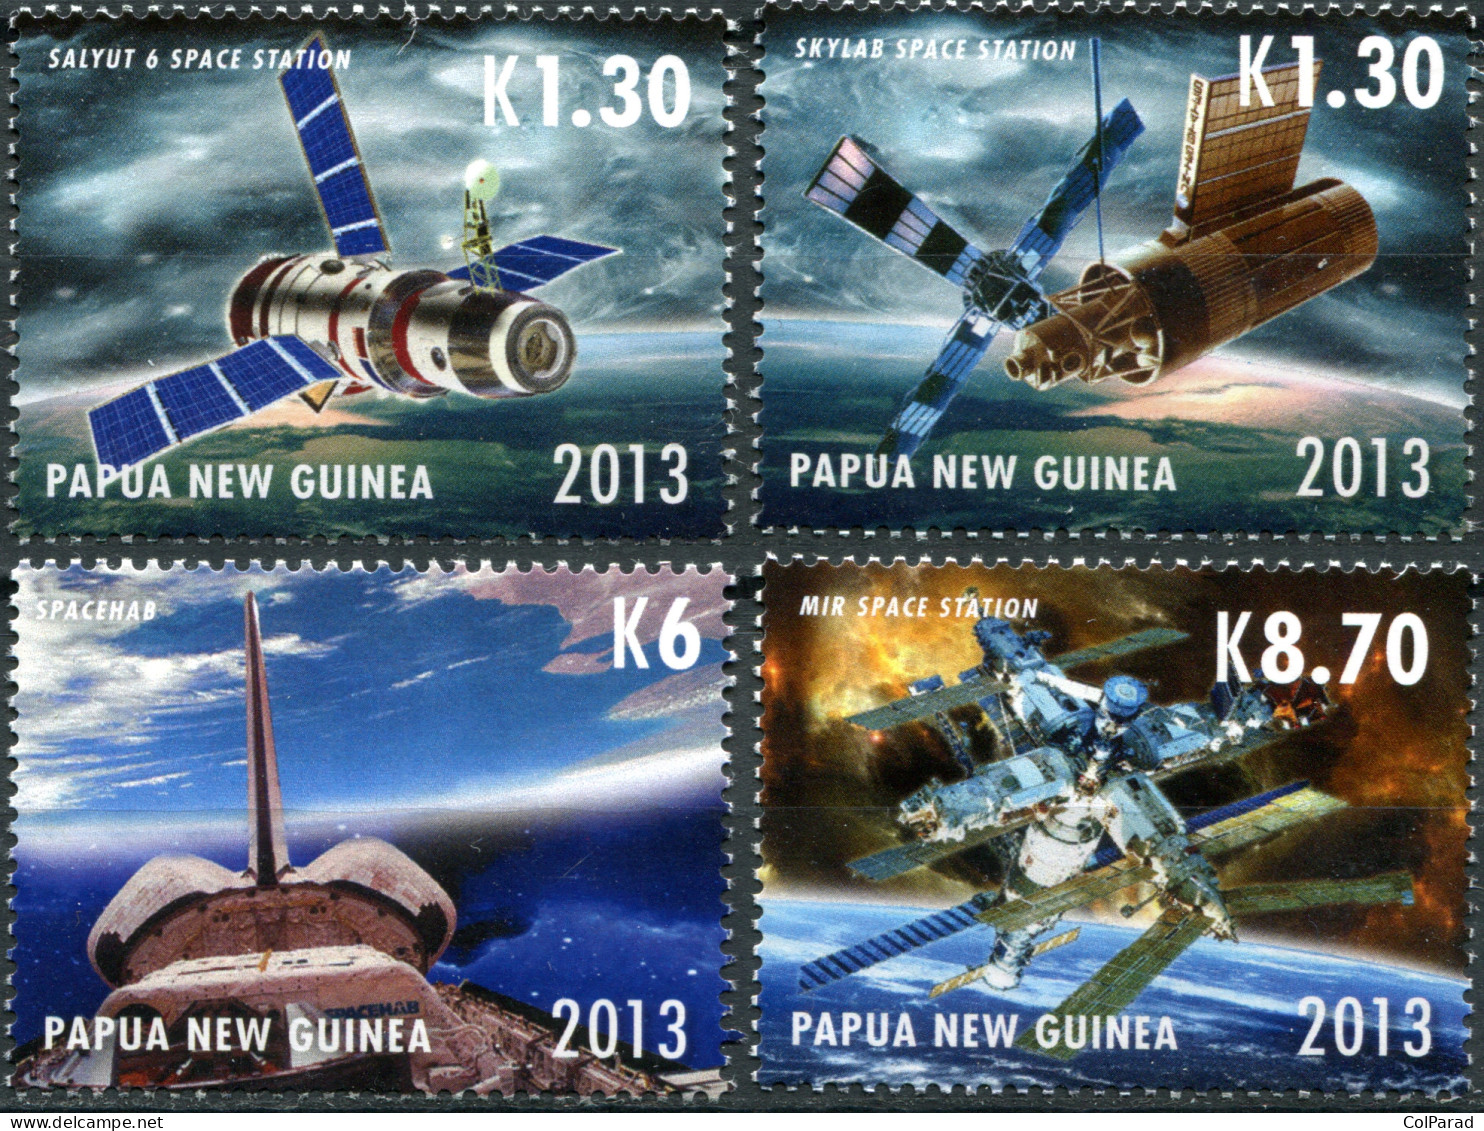 PAPUA NEW GUINEA - 2013 - SET OF 4 STAMPS MNH ** - International Space Station - Papua New Guinea